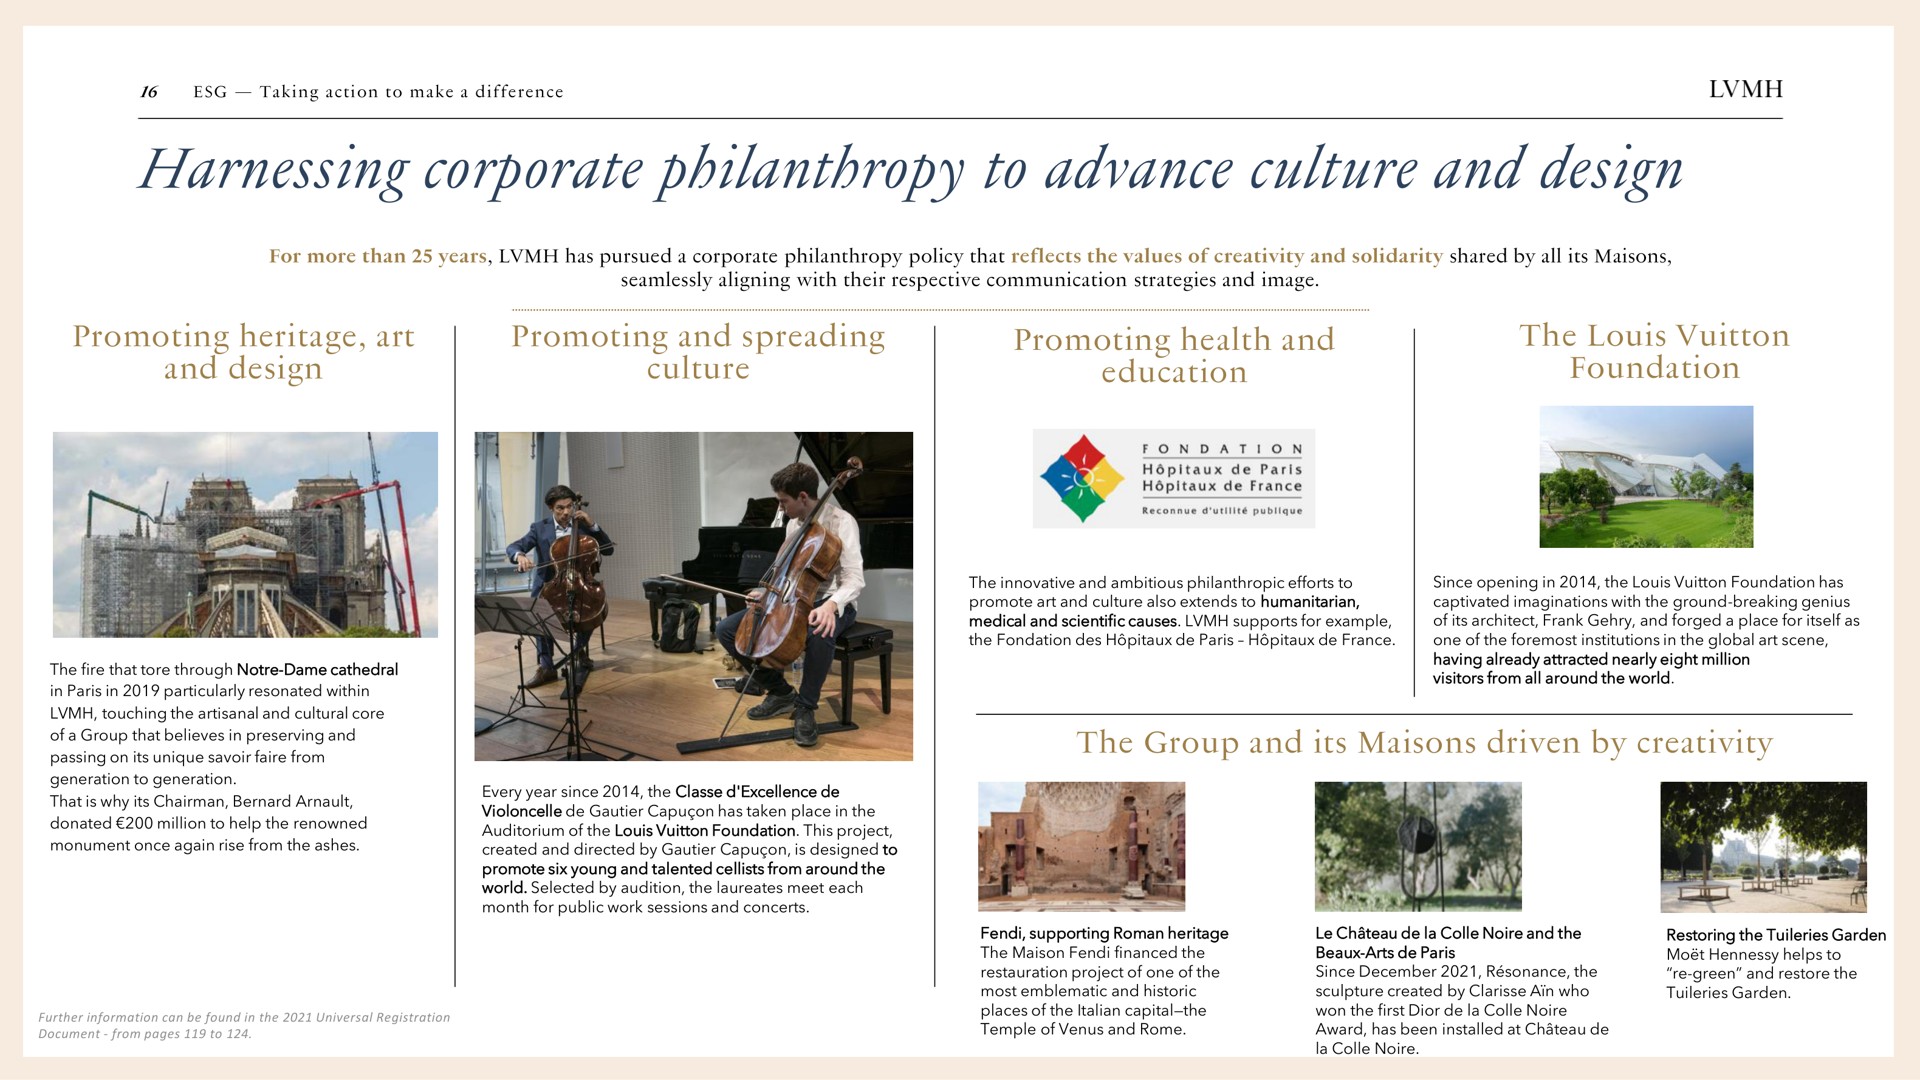 harnessing corporate philanthropy to advance culture and design | LVMH